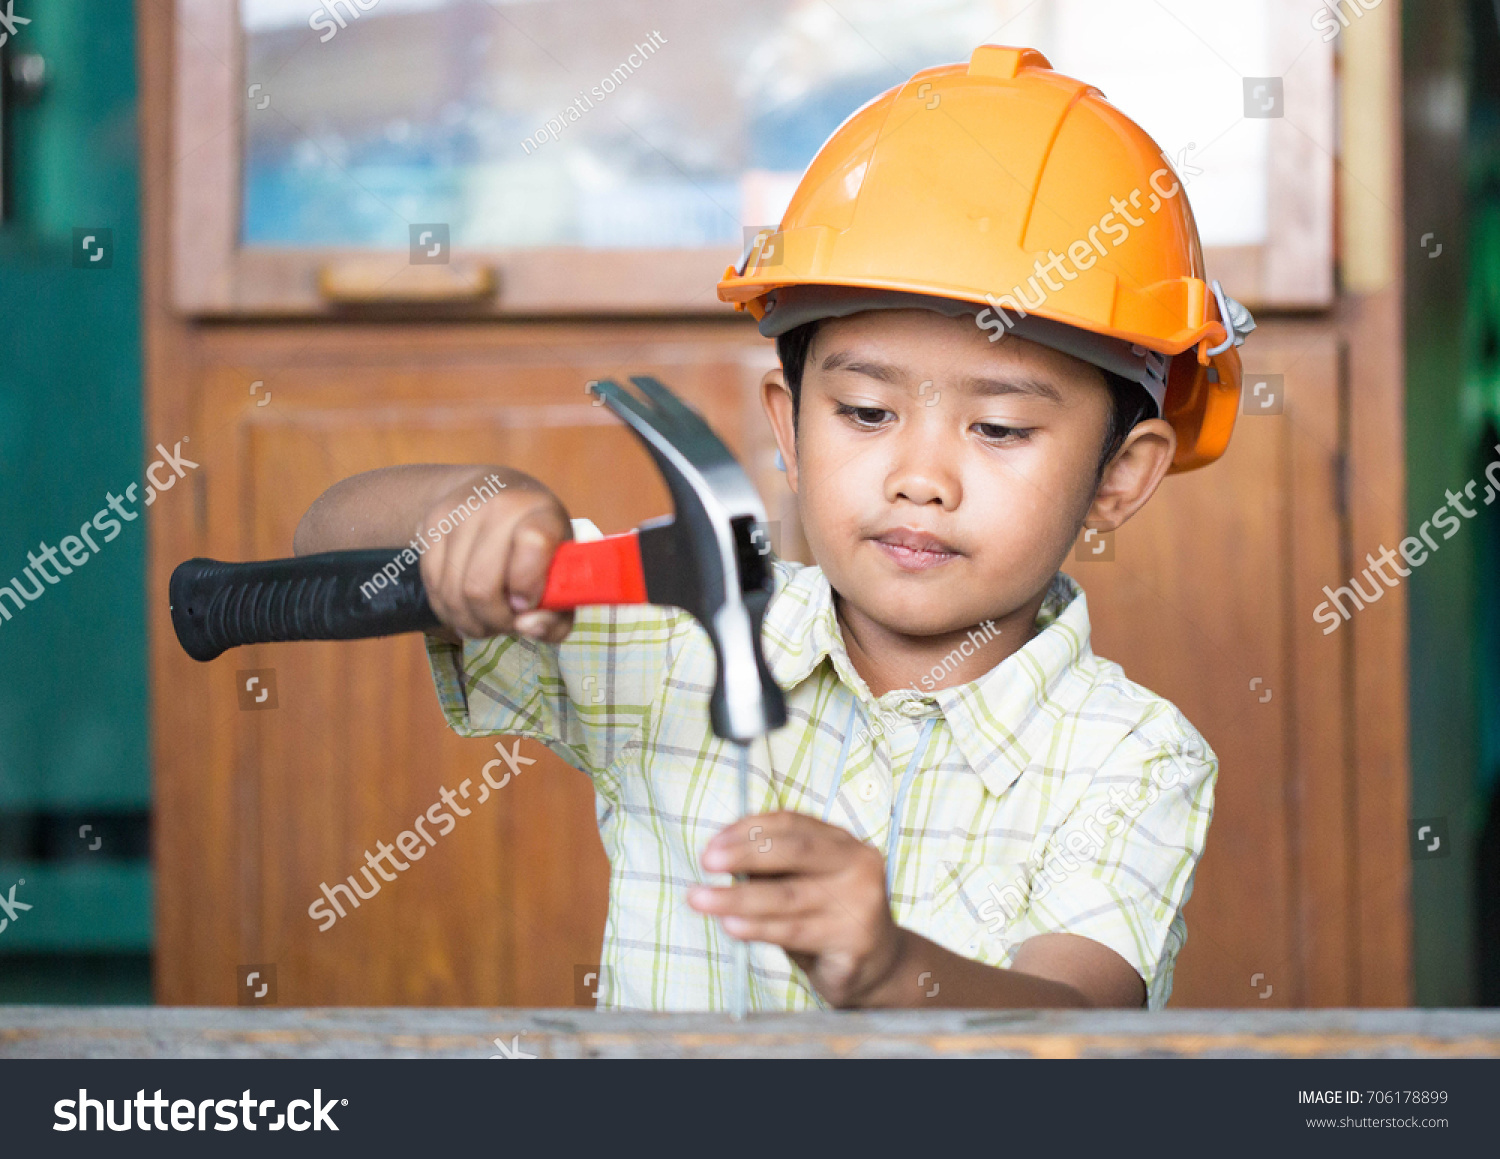 Children use a hammer to nail. #706178899